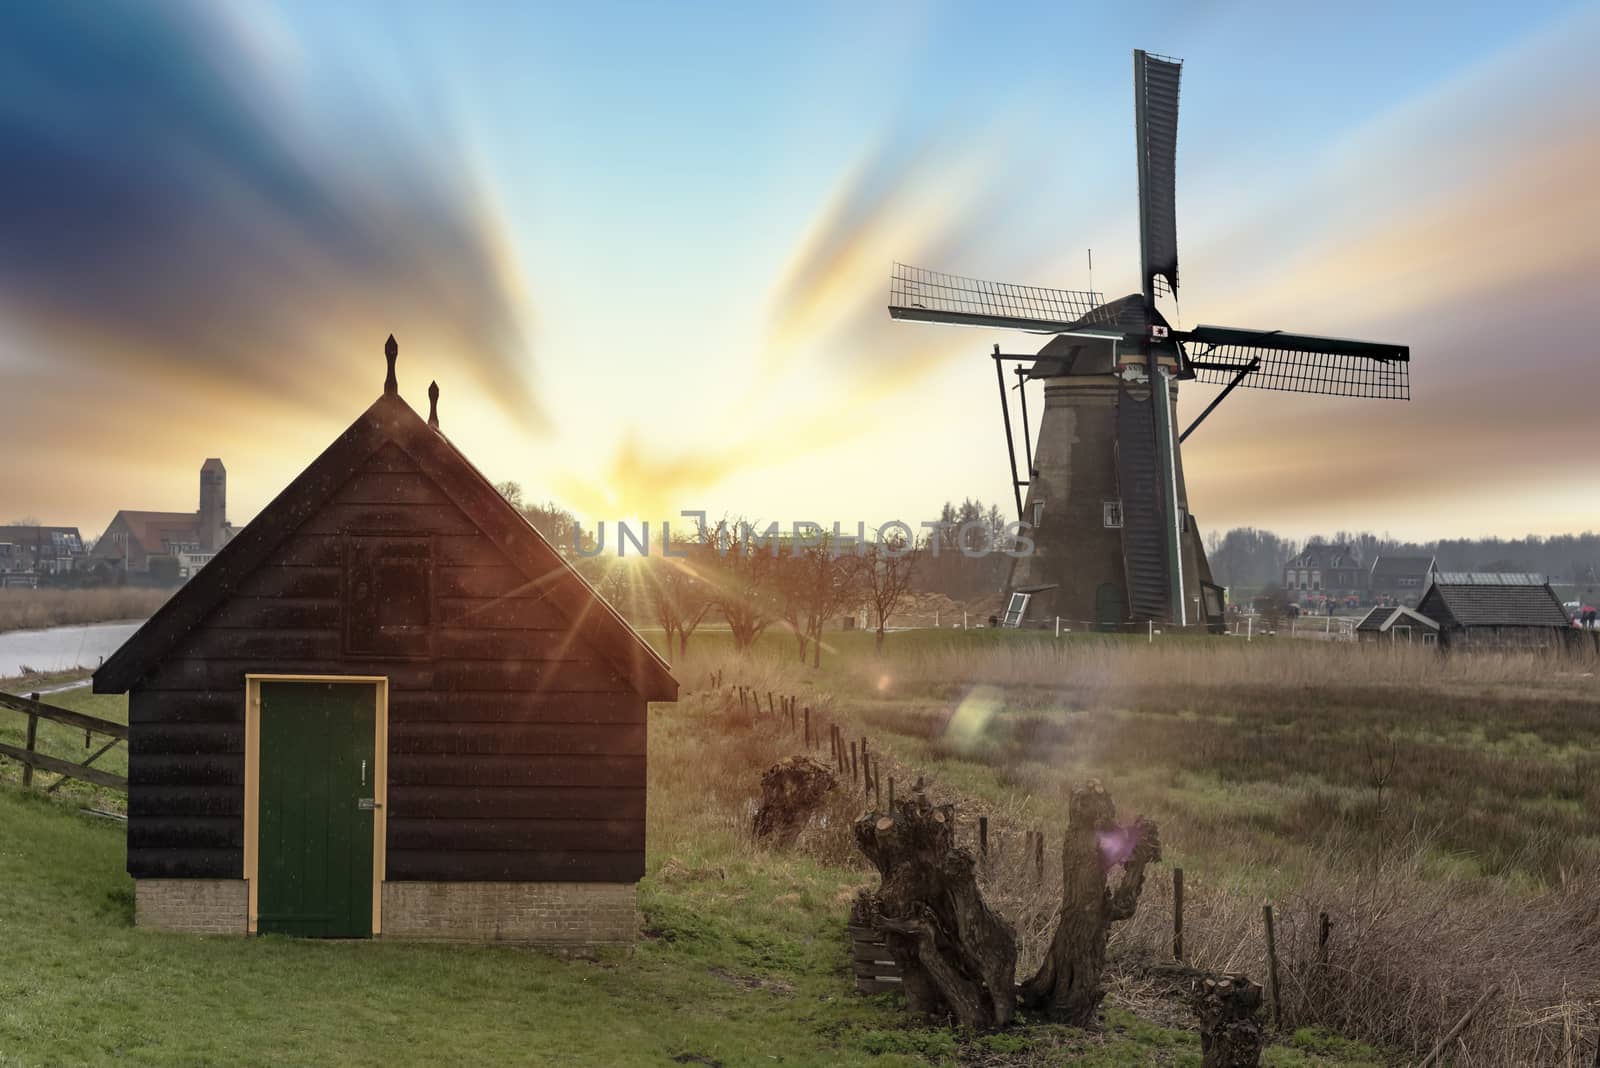 Long exposure of a typical vintage Dutch sunset landscape in the rural area of The Netherlands with windmill and low clouds by ankorlight